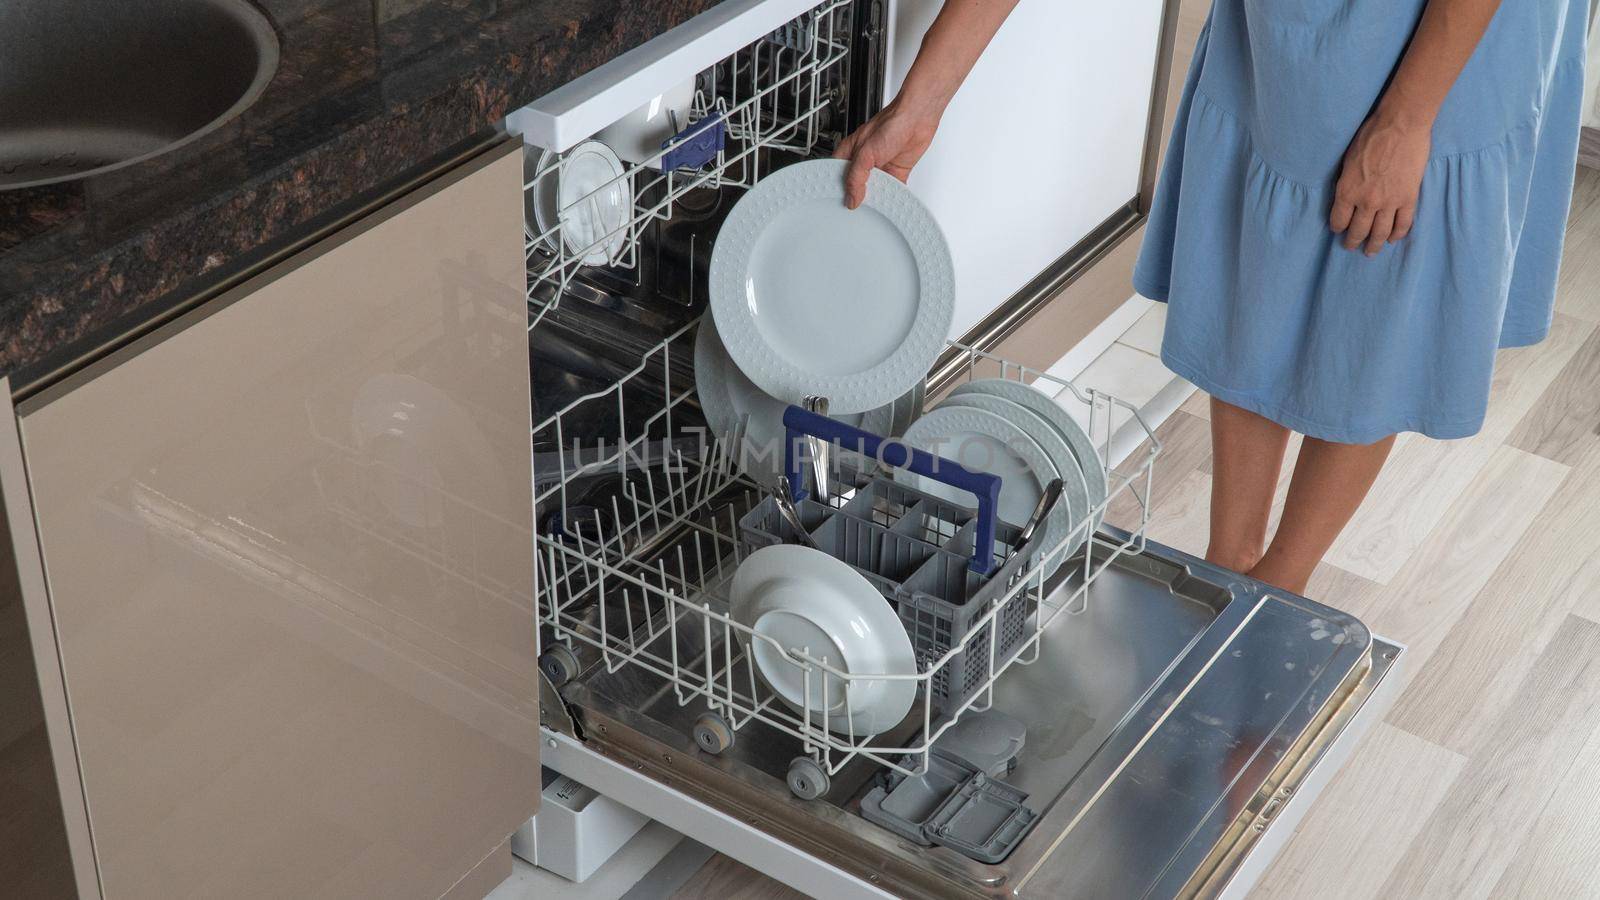 A woman pulls out a clean dish from a dishwasher by voktybre